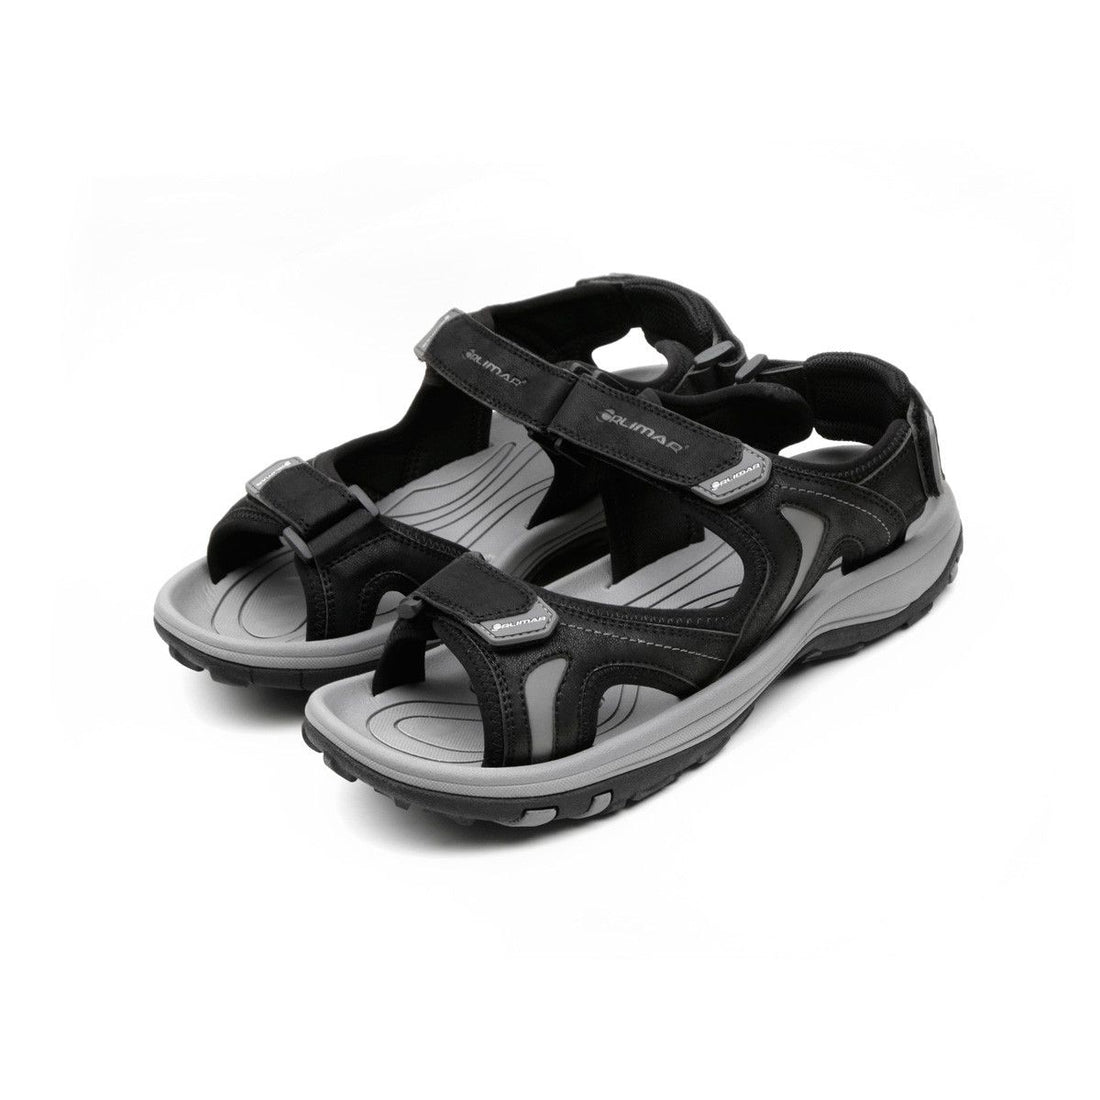 Orlimar Golf Sandals with Replaceable Spikes